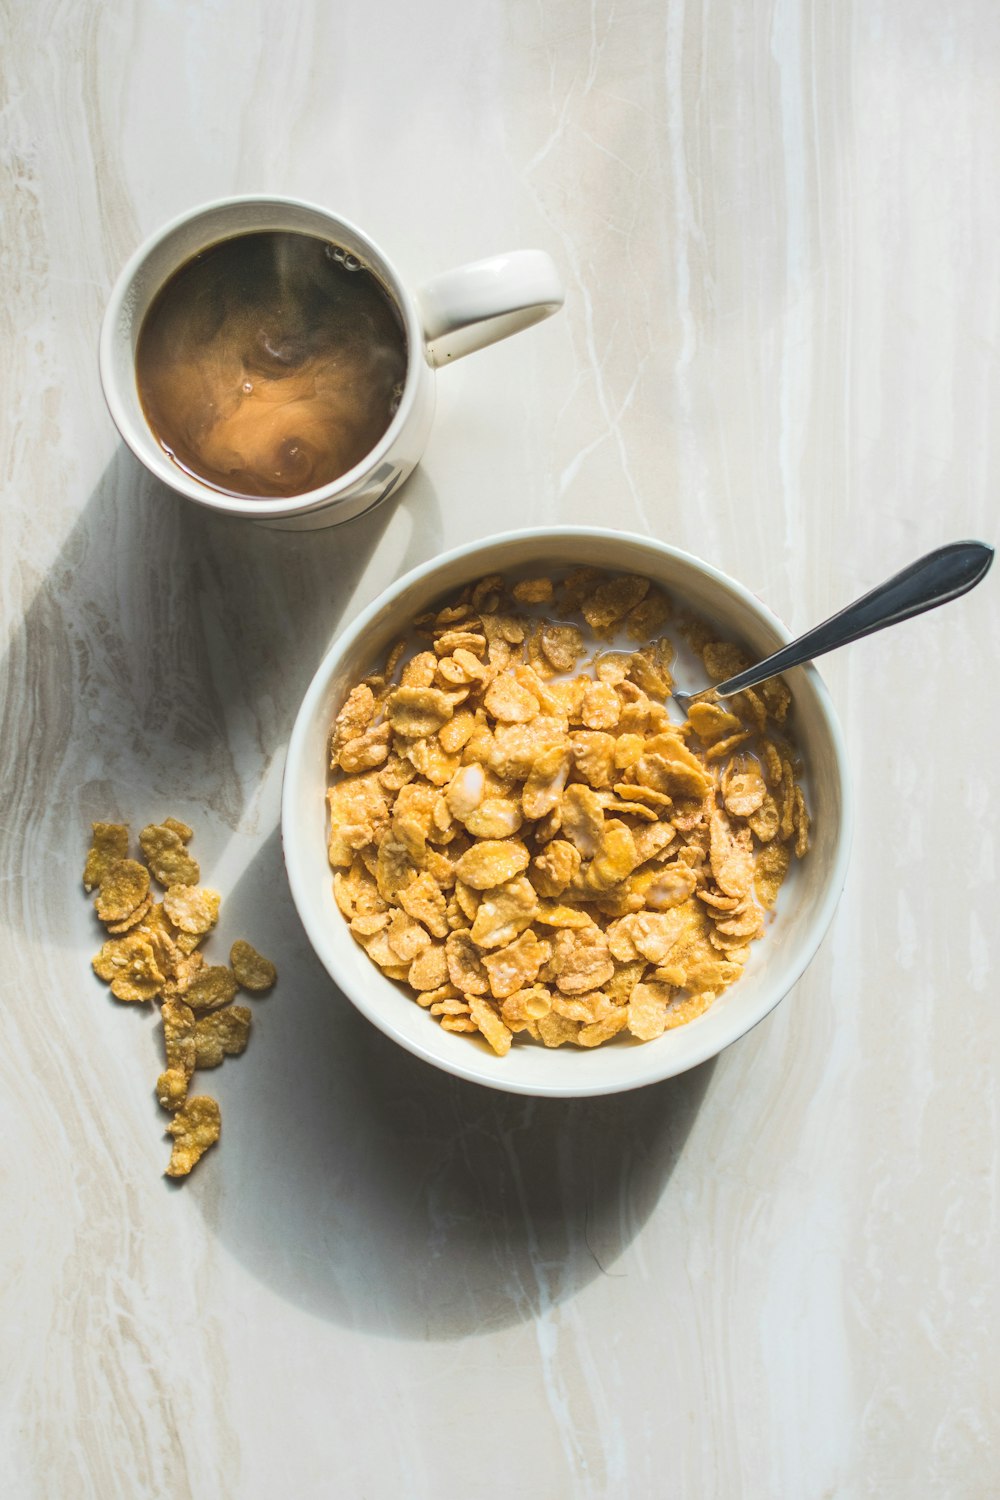 ceramic bowl filled with cereals and spoon